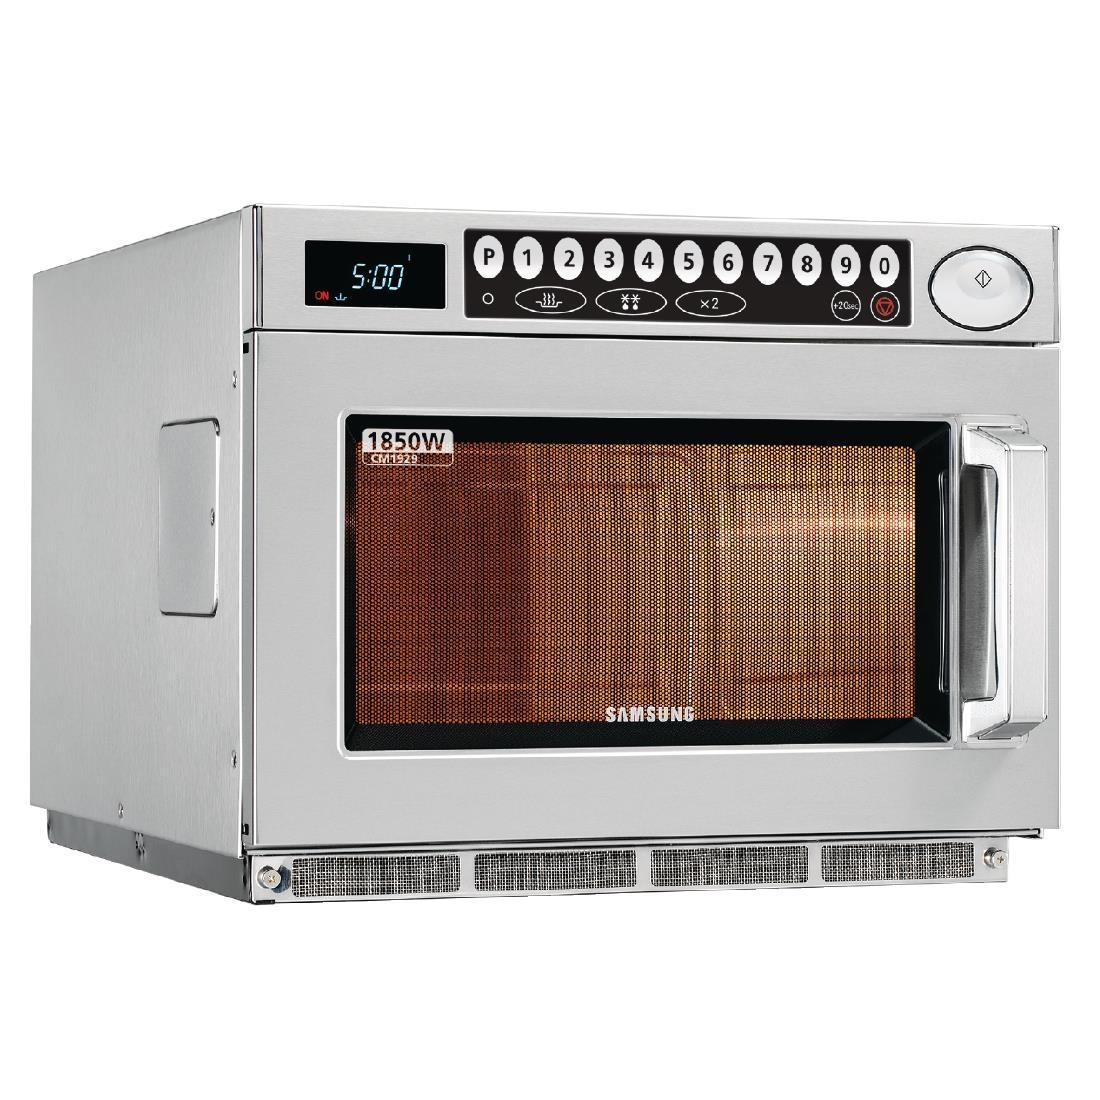 Samsung Manual Microwave 26ltr 1850W CM1929 with Liner